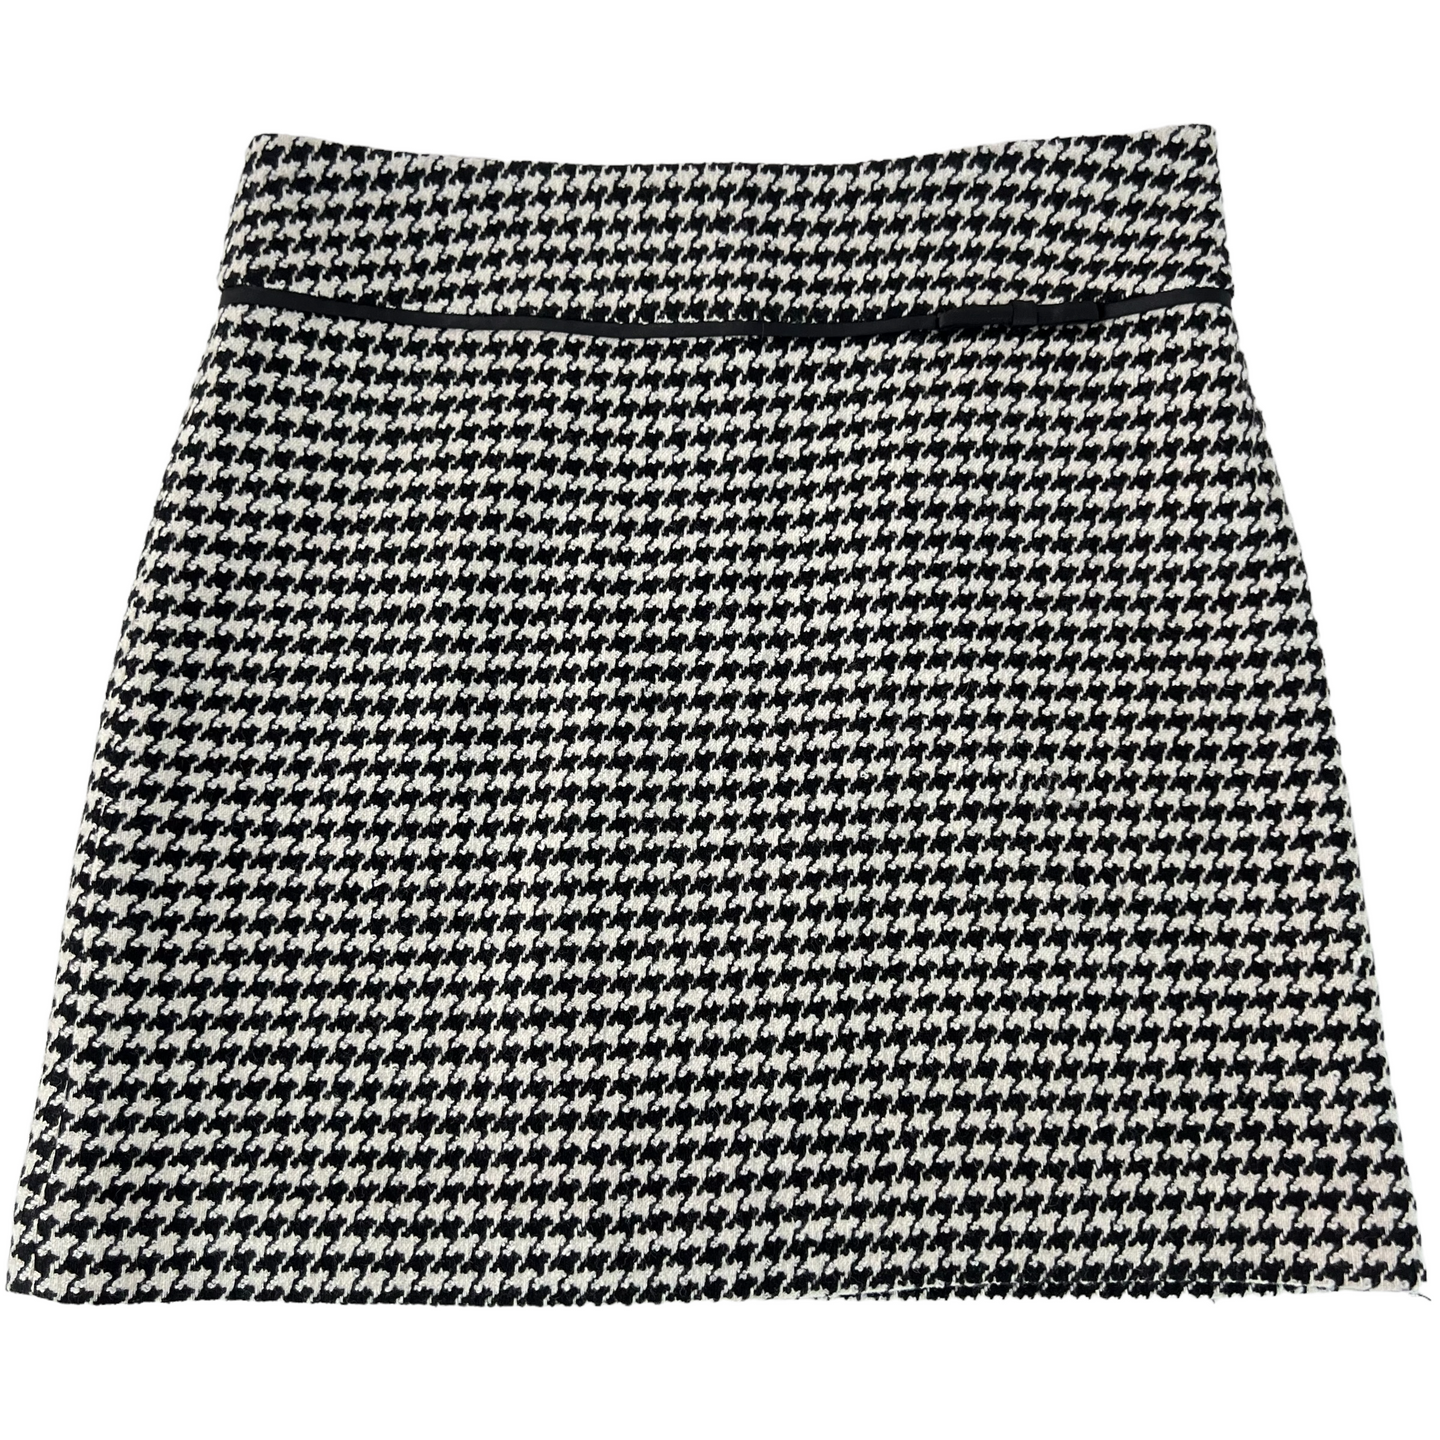 Houndstooth Wool Blend Skirt Black and White Size 12. Brand: Apostrophe. Material: 50% Wool,48% Rayon,1% Spandex. 